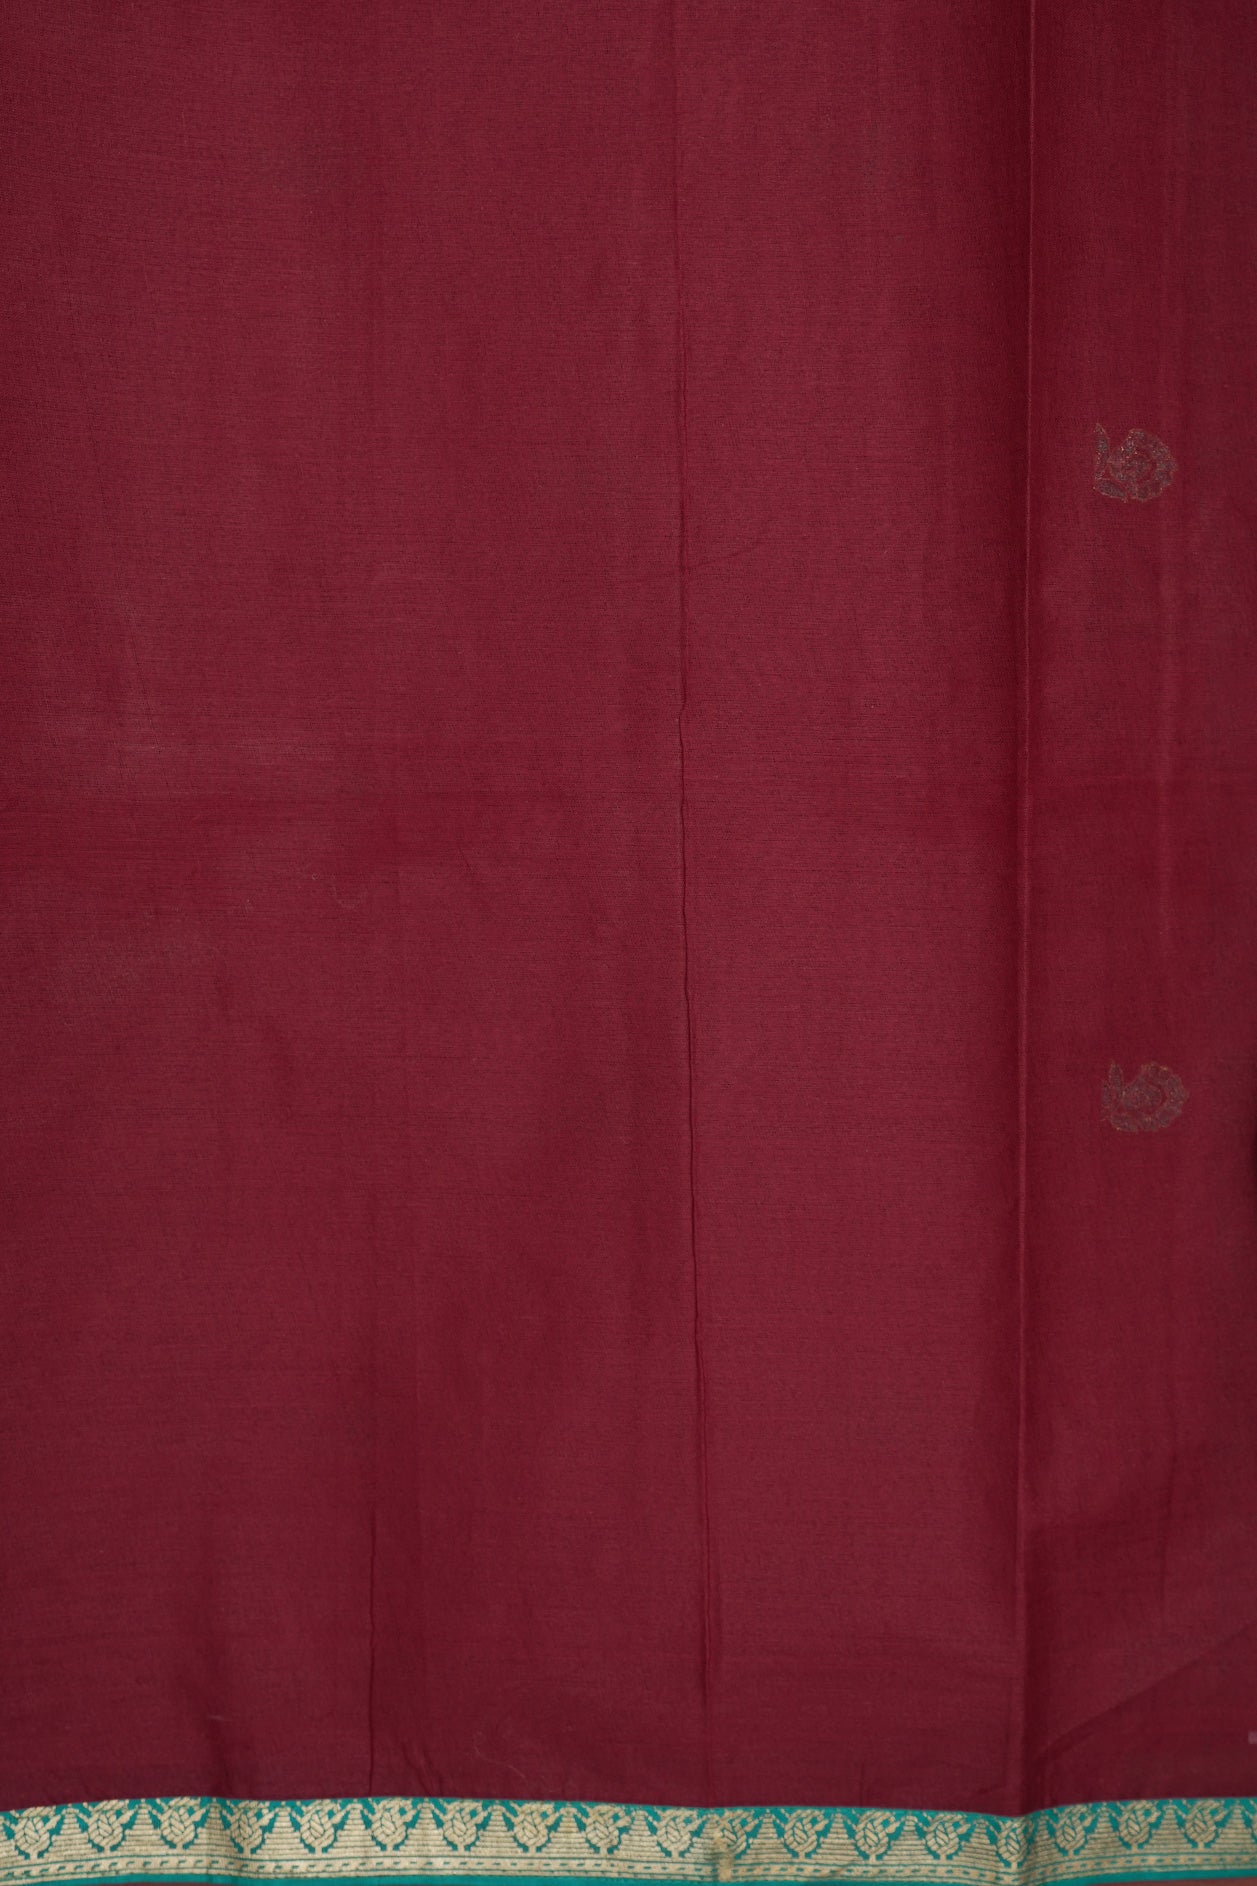 Floral Embroidered Motifs Maroon Ahmedabad Cotton Saree